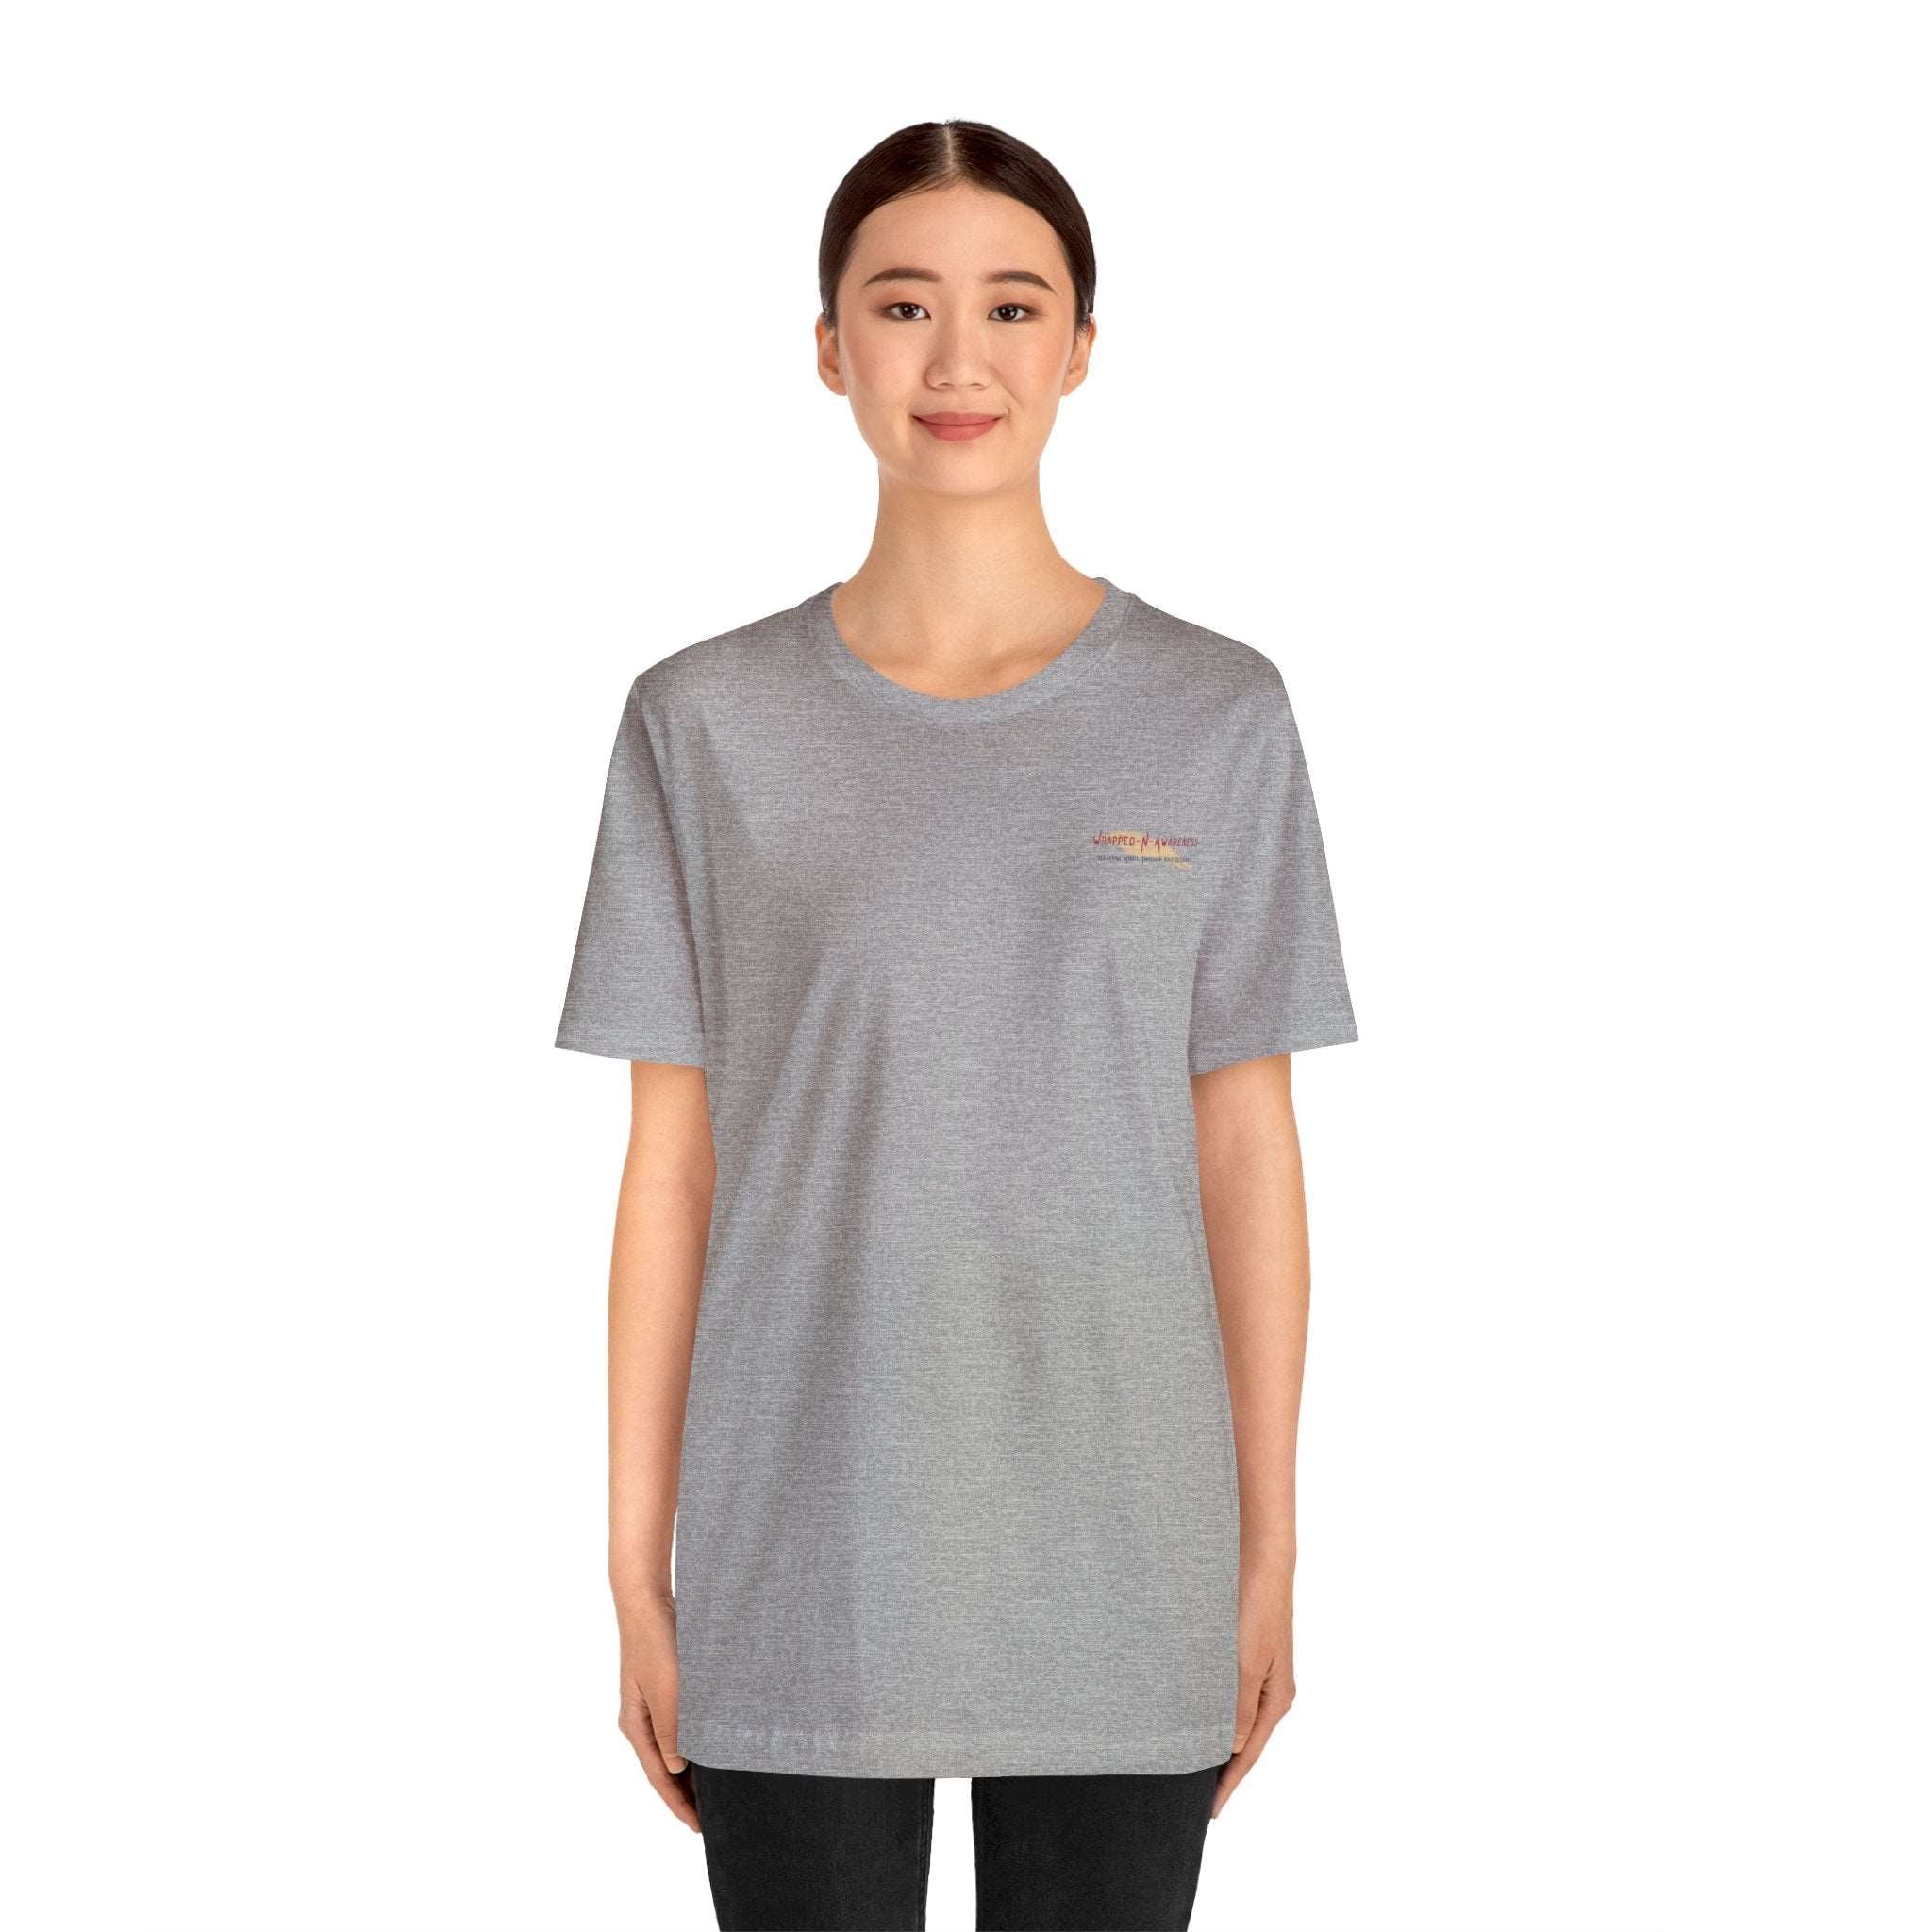 Find Your Balance Jersey Tee - Bella+Canvas 3001 Heather Mauve Airlume Cotton Bella+Canvas 3001 Crew Neckline Jersey Short Sleeve Lightweight Fabric Mental Health Support Retail Fit Tear-away Label Tee Unisex Tee T-Shirt 9914587706135696063_2048_16eef409-f5a8-4277-aa82-bef8d3e8bd3f Printify